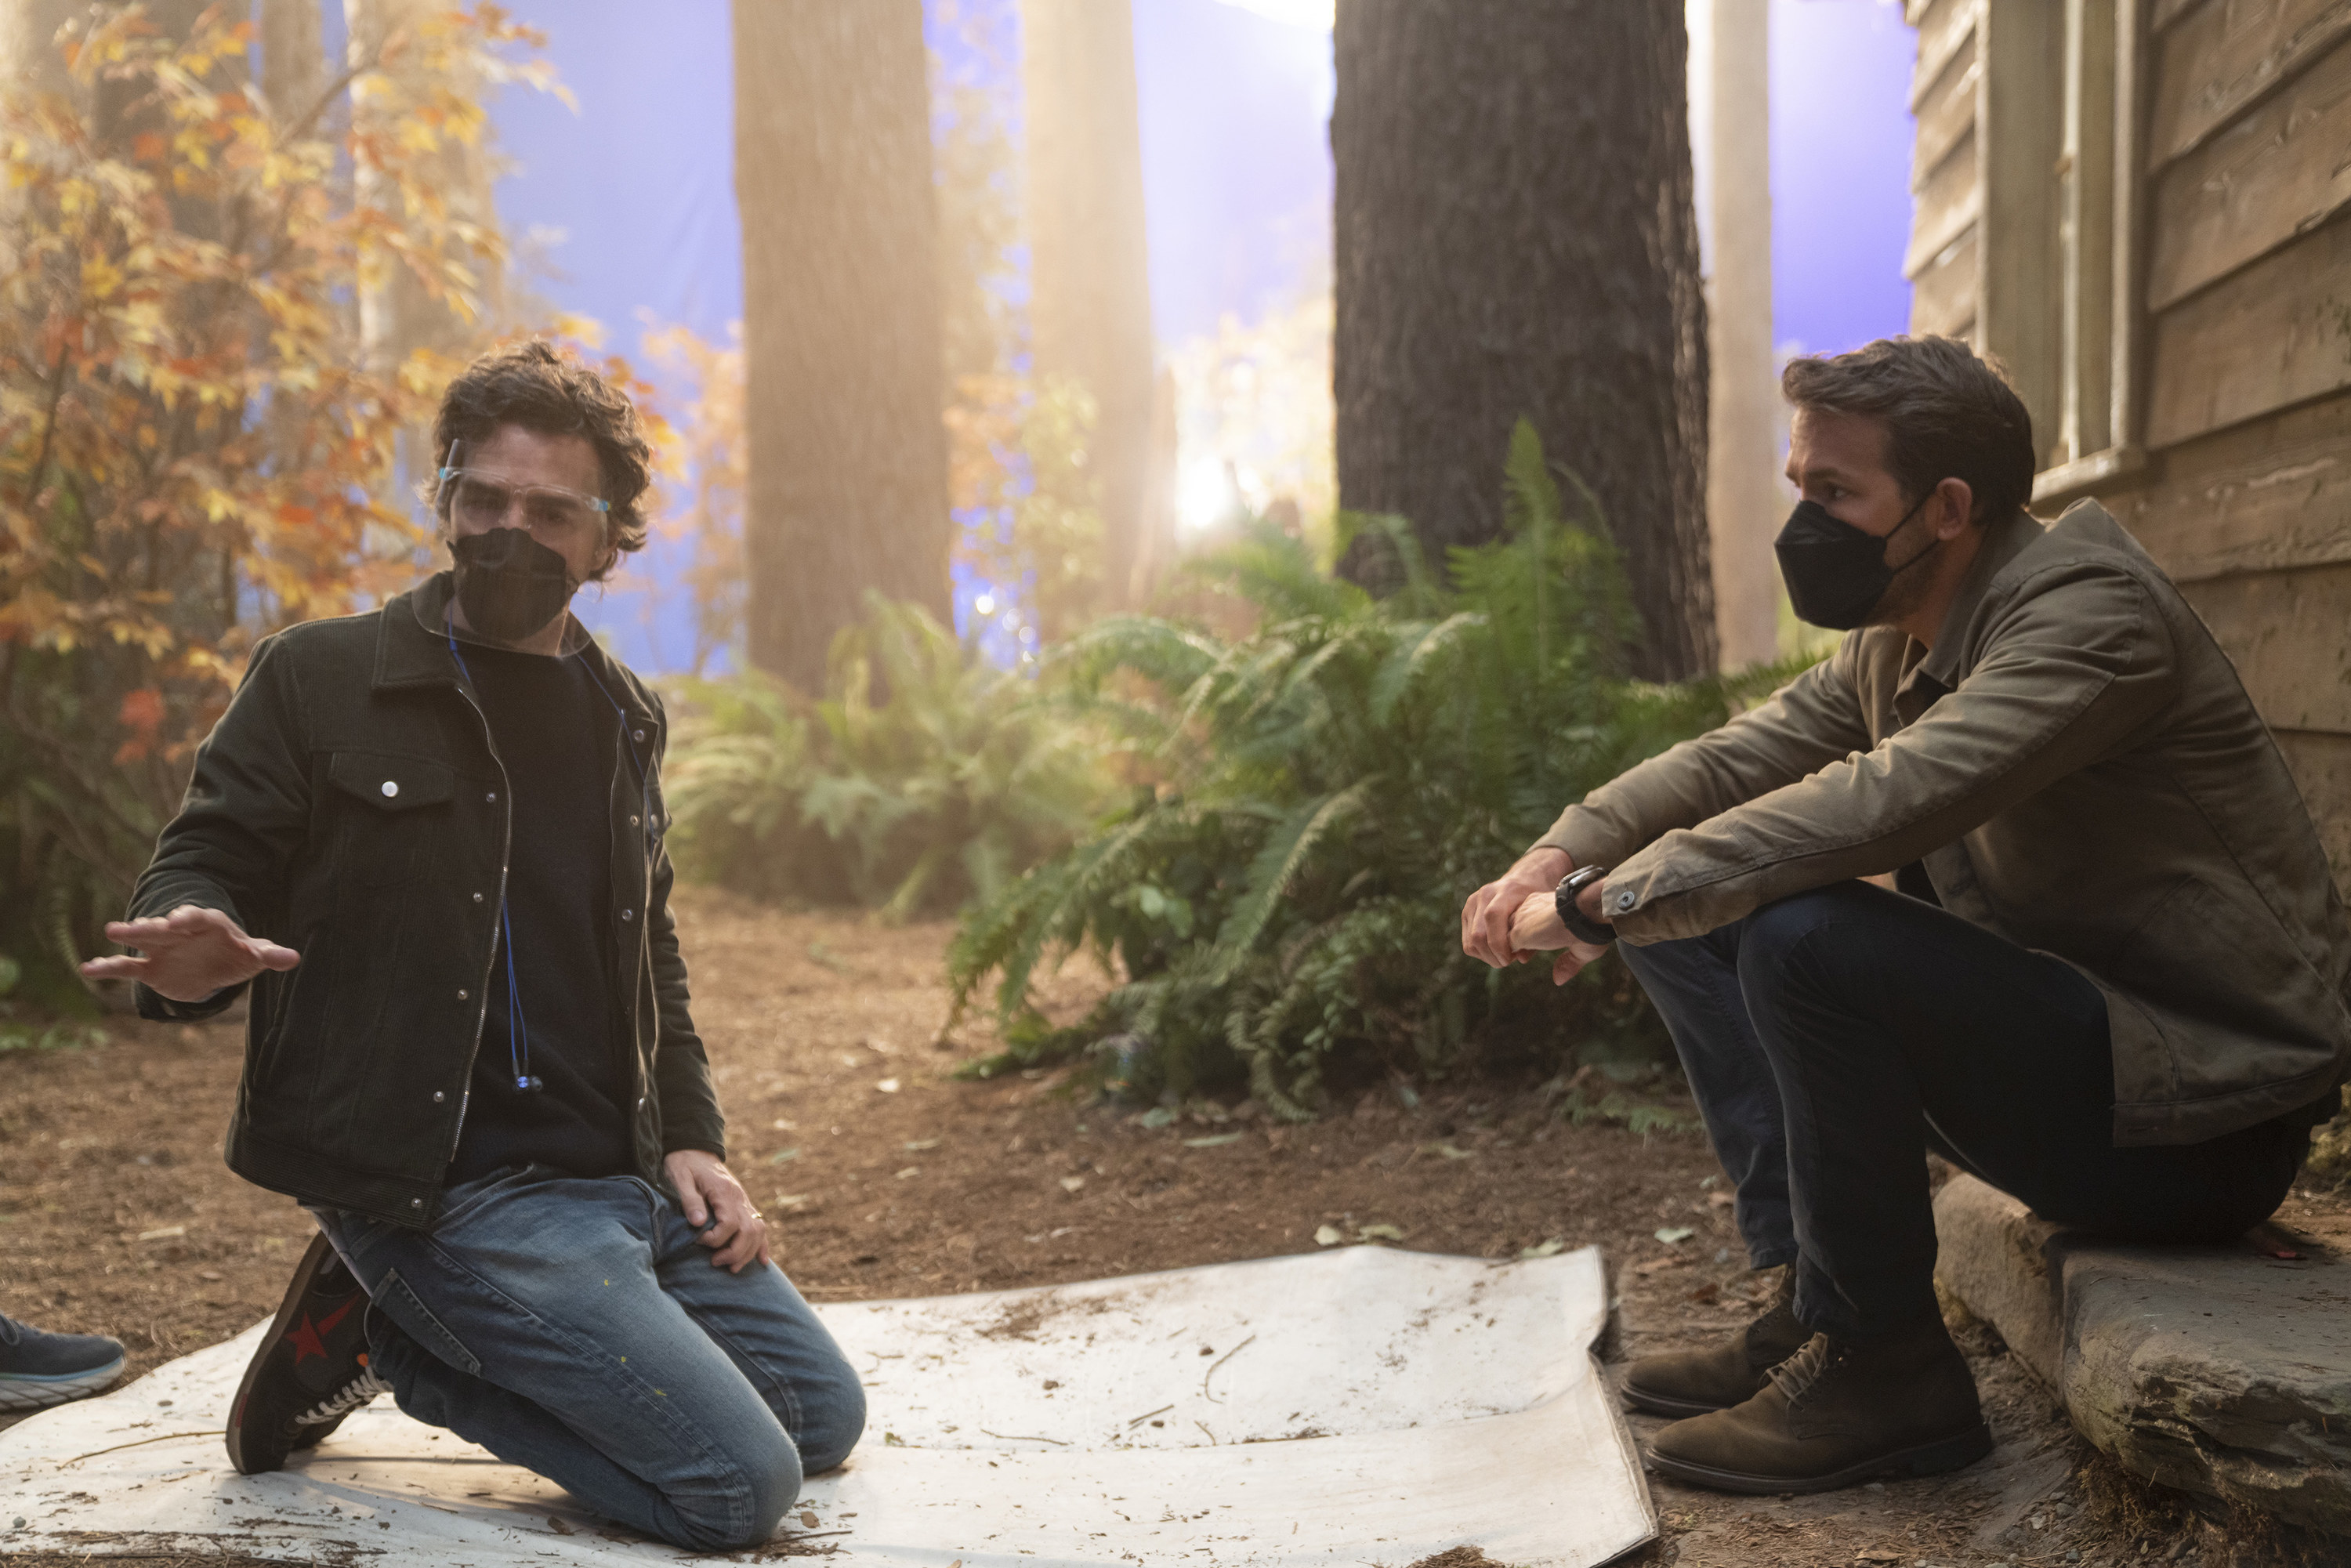 Shawn Levy and Ryan Reynolds talking on set with masks on